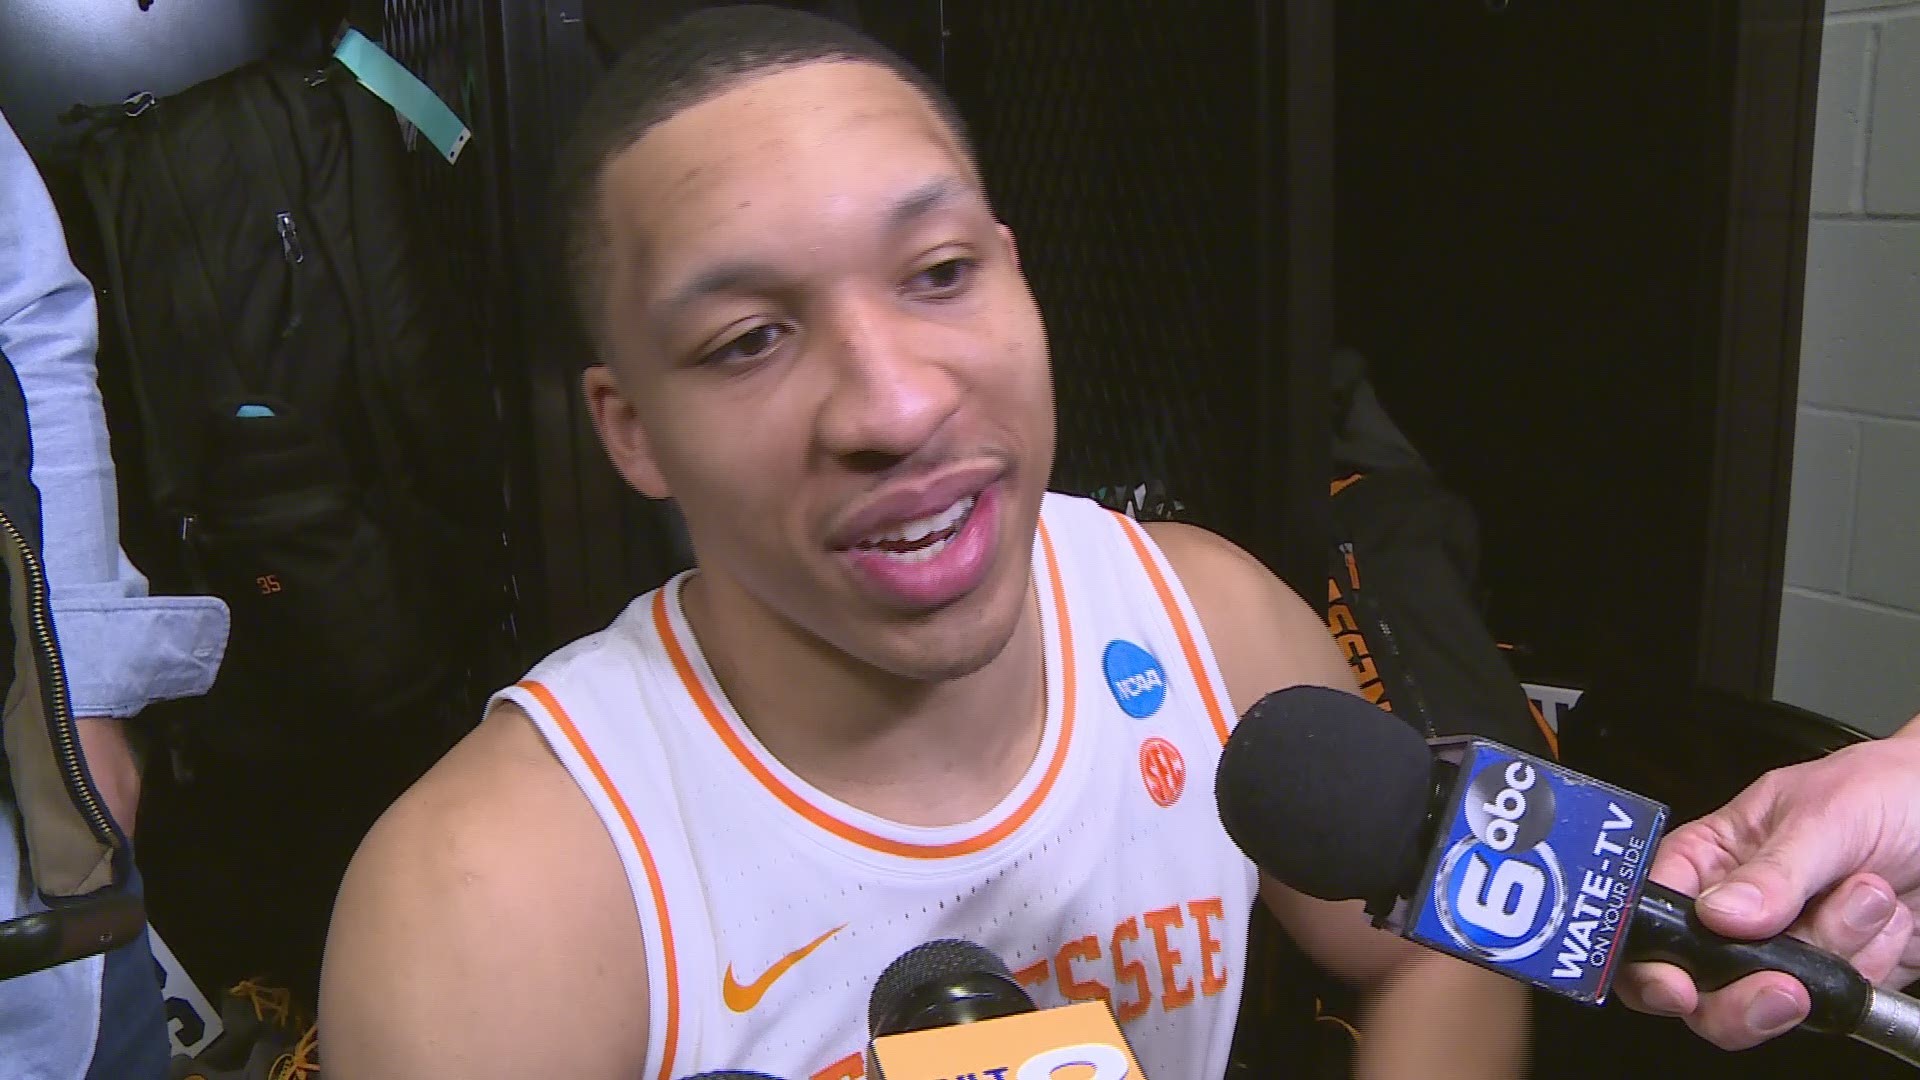 Grant Williams scored 19 points including six in overtime to help the Vols beat Iowa and advance to the Sweet 16 for the first time since 2014.